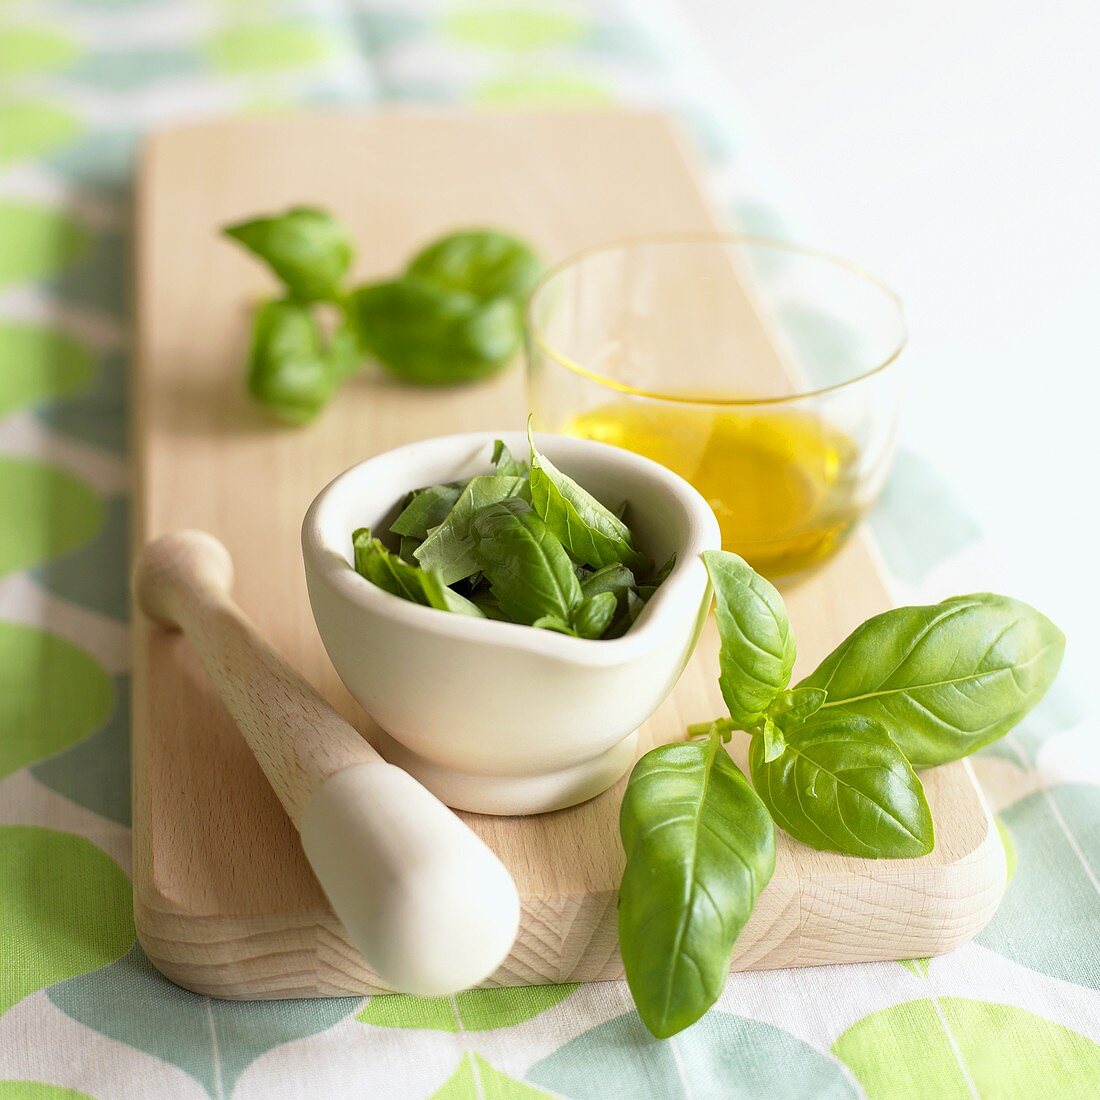 Fresh basil leaves in a mortar and olive oil